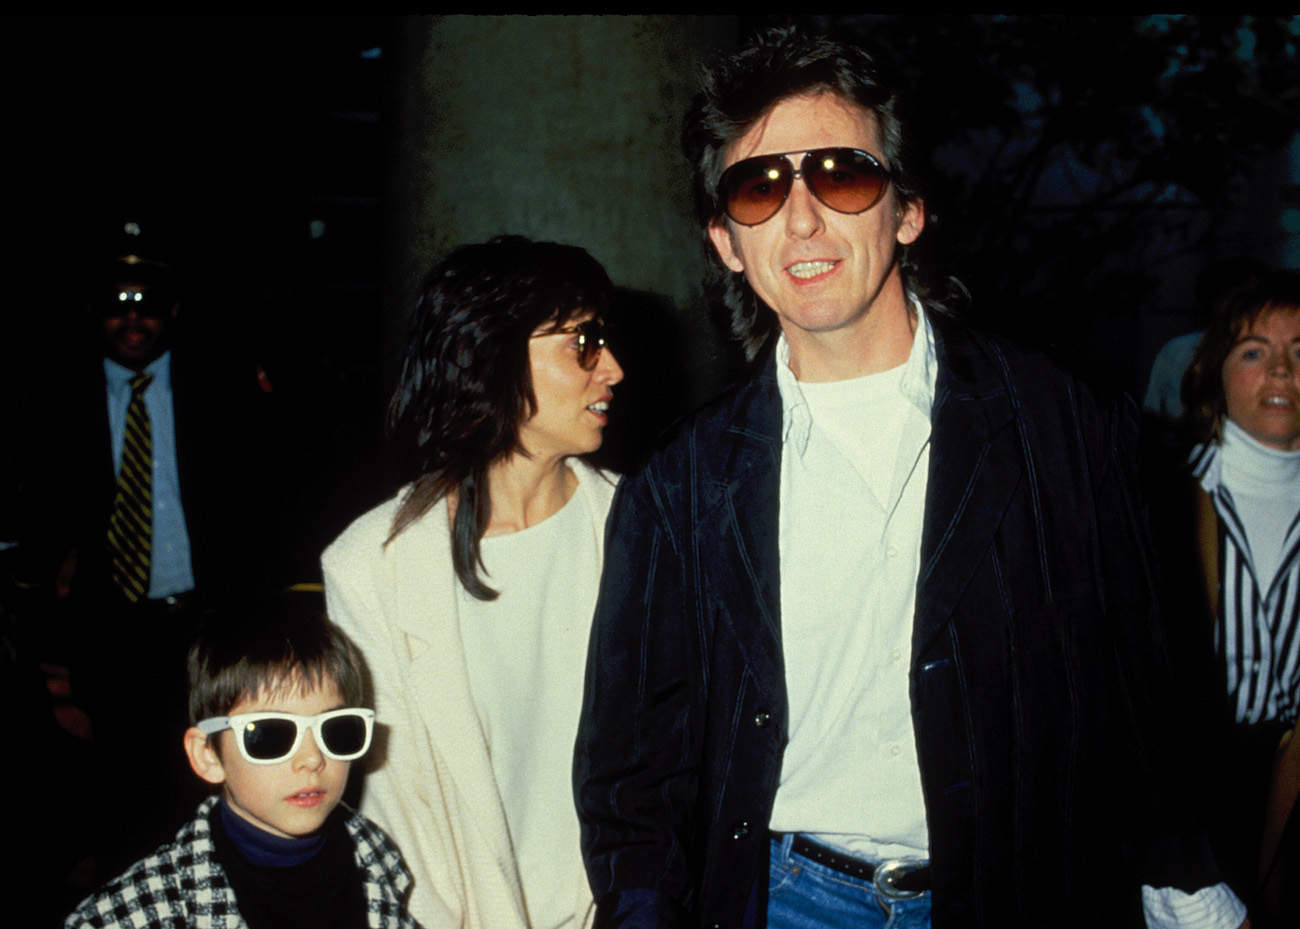 George Harrison with his wife, Olivia, and their son, Dhani, at LAX Airport in 1988.